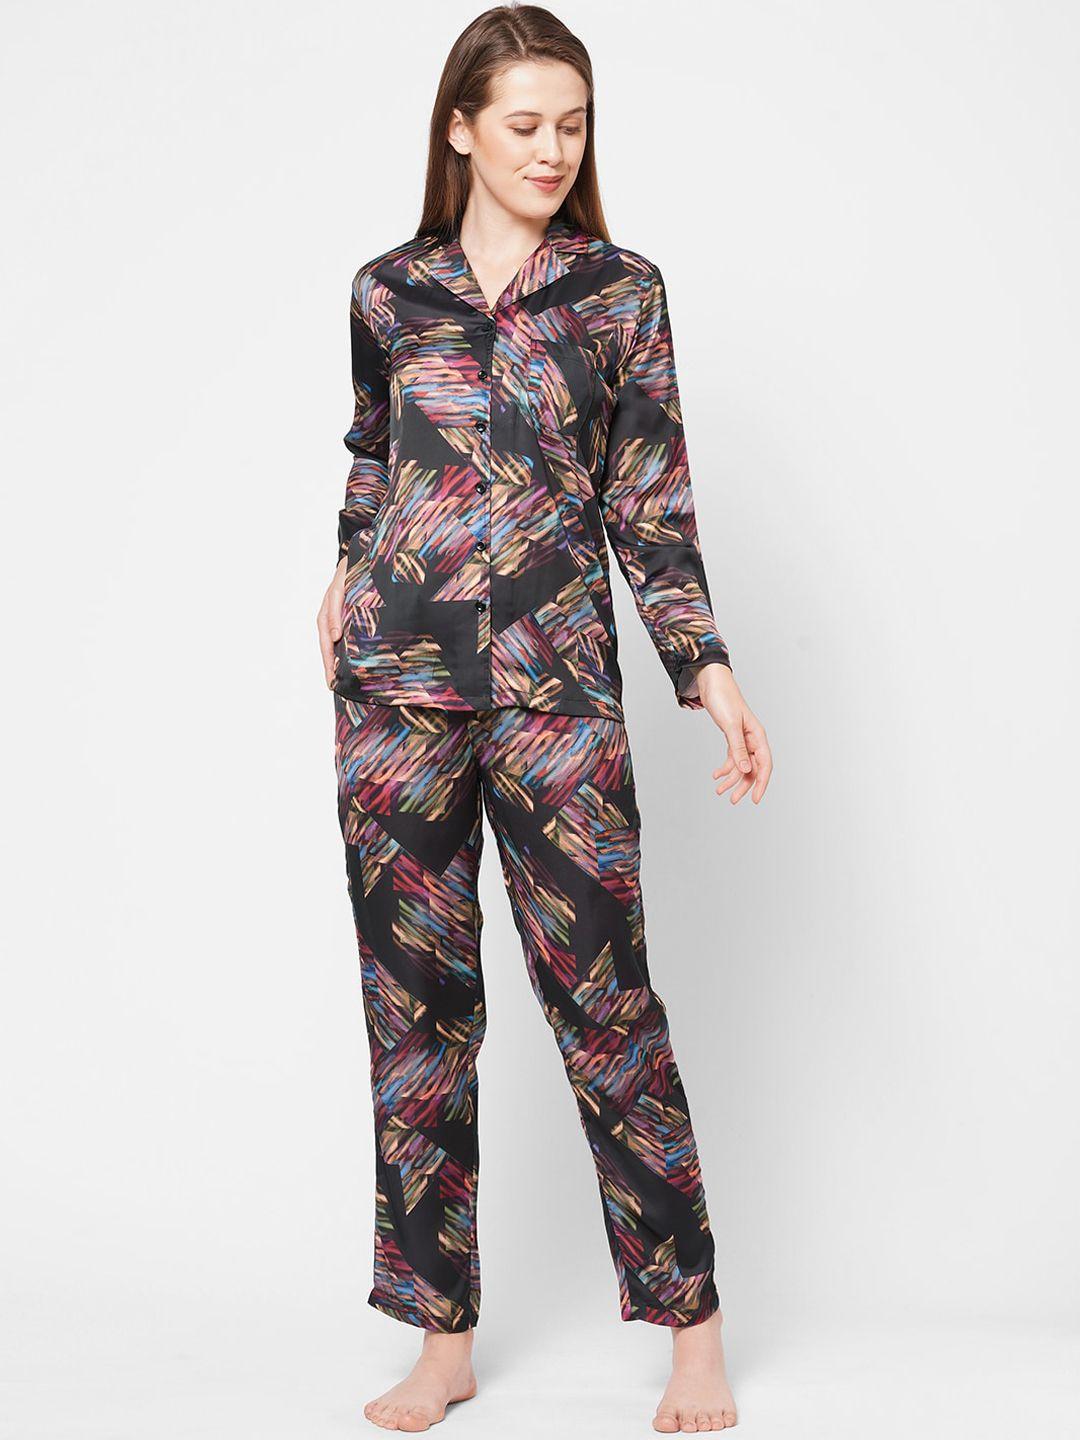 drape in vogue women 2 pieces abstract printed night suit